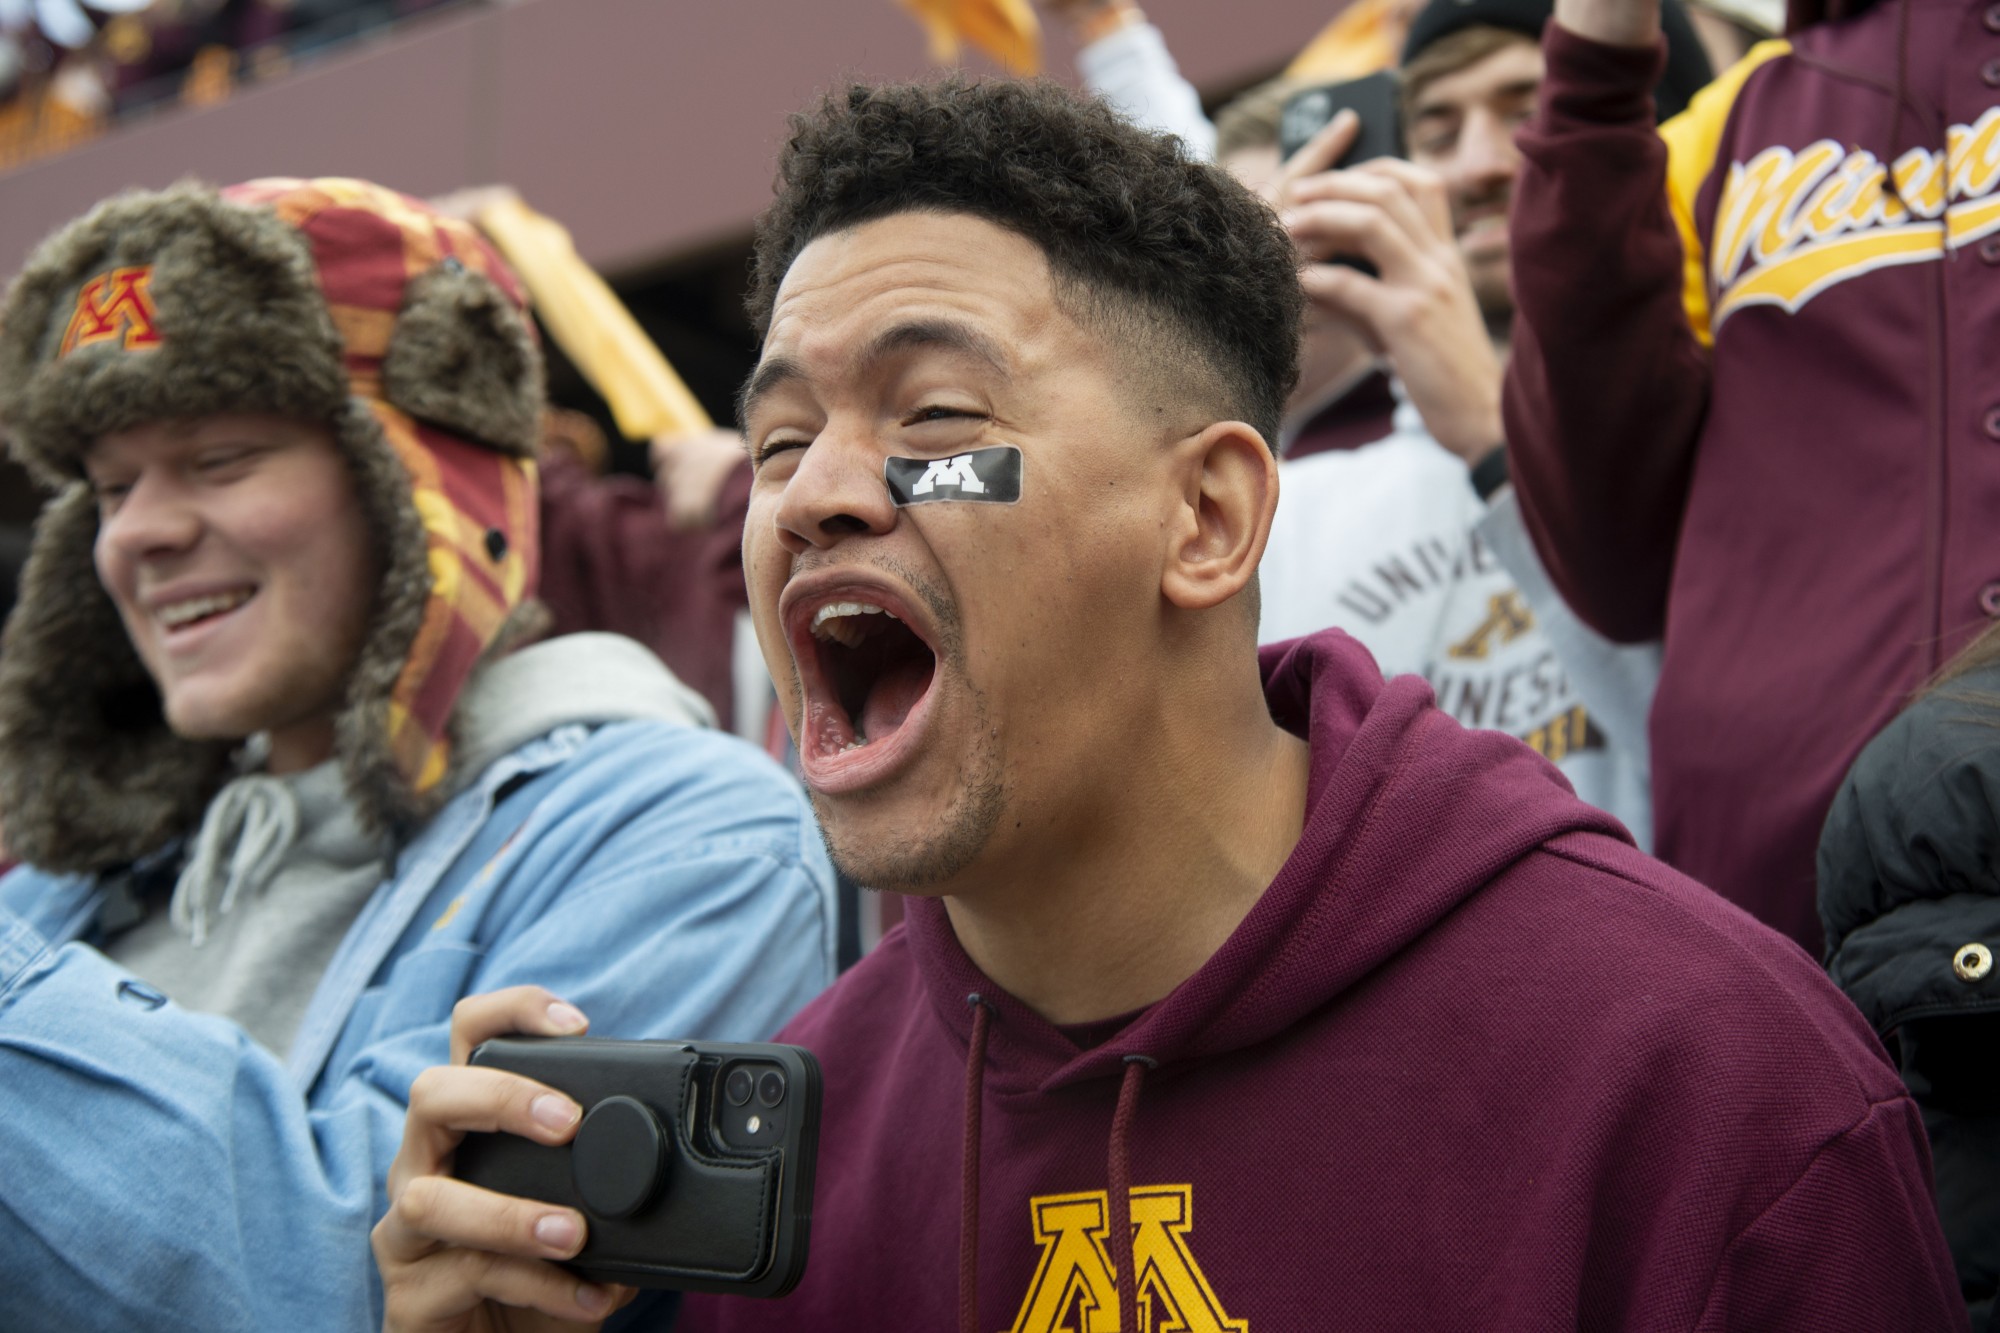 Fans cheer for the Gophers as they enter the field at TCF Bank Stadium on Saturday, Nov. 9. The Gophers defeated Penn State 31-26 to bring their record to 9-0. A first since 1904. 